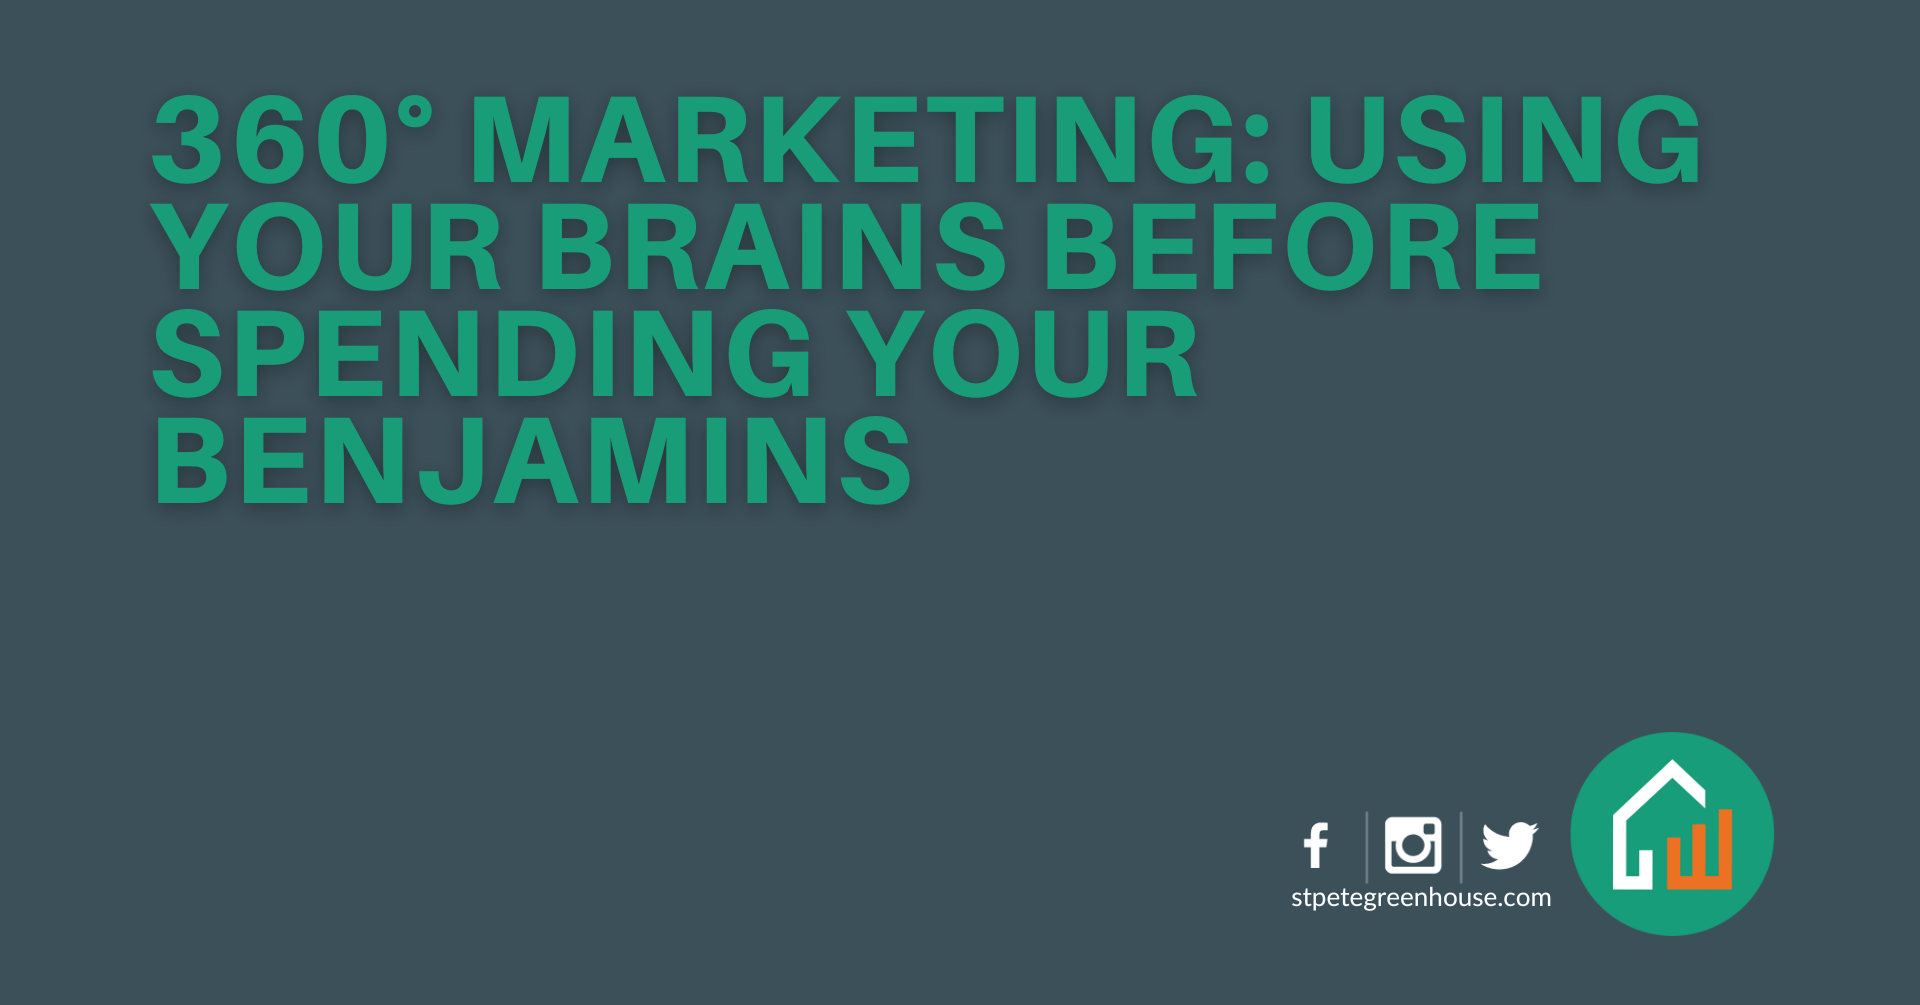 360° Marketing: Using Your Brains Before Spending Your Benjamins-image